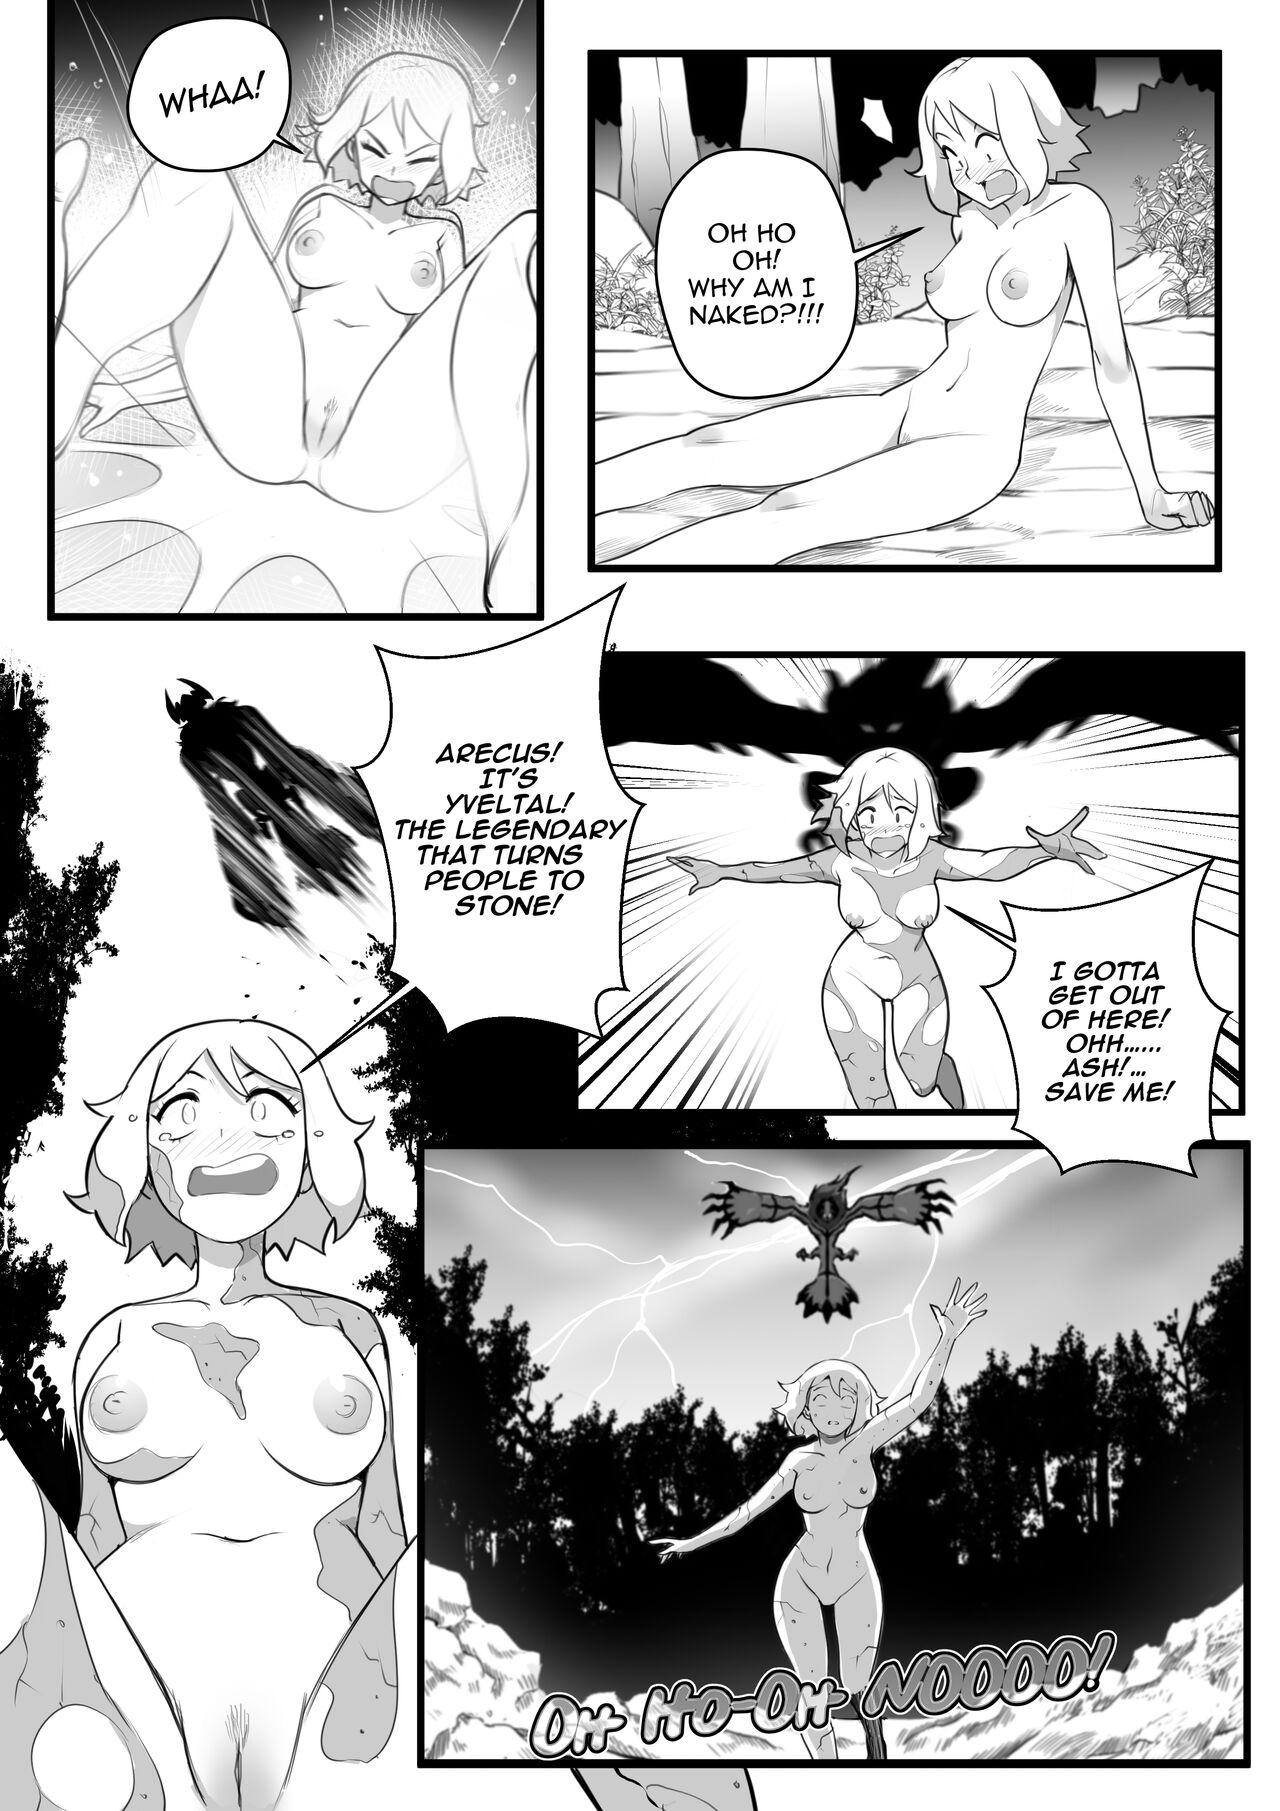 Office Serena: A Petrified Sacrifice though time! - Pokemon | pocket monsters Daddy - Picture 3